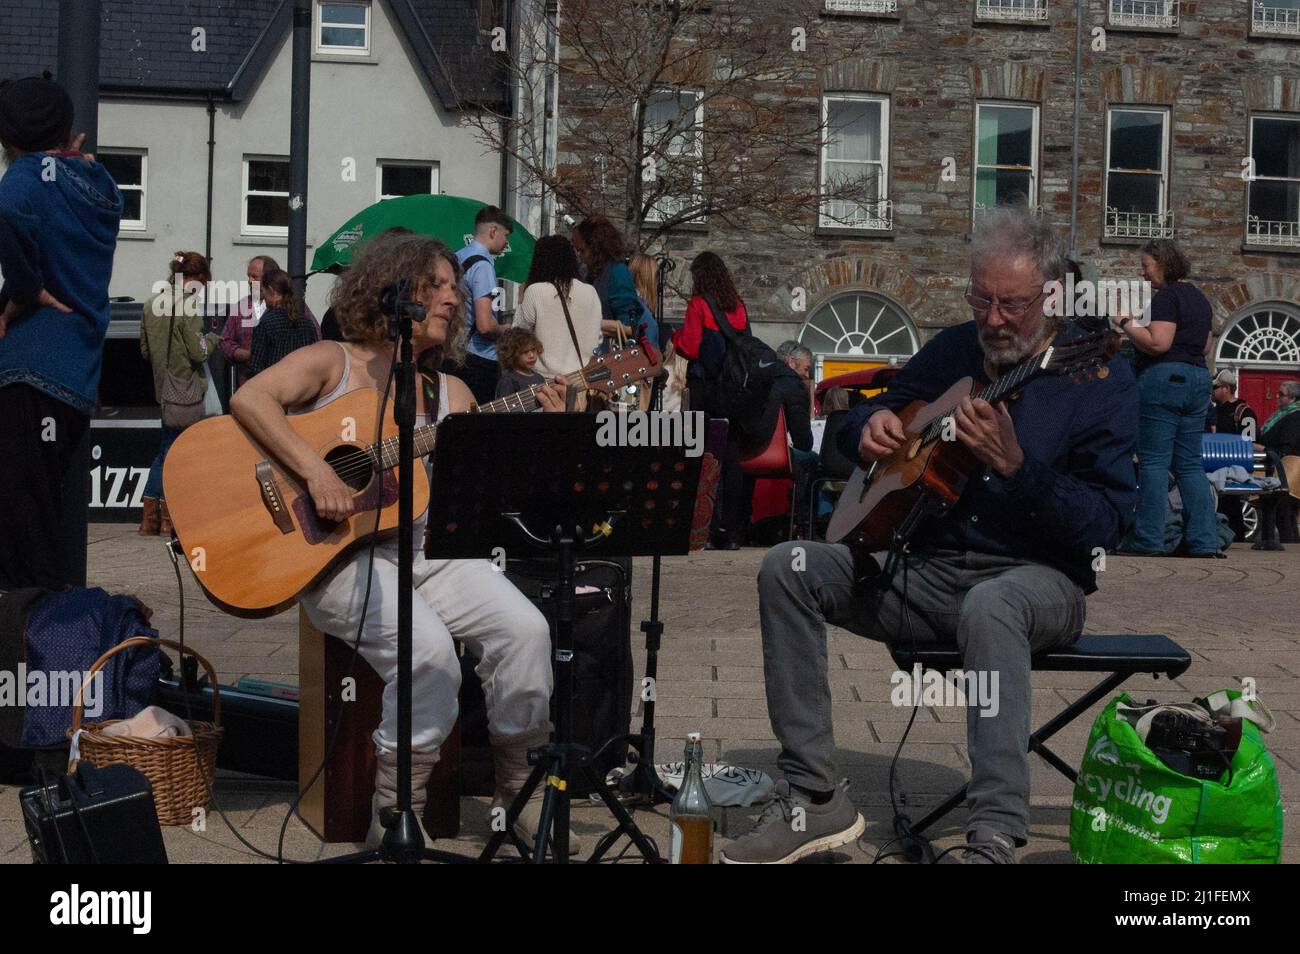 Bantry, West Cork, Ireland, Friday 25 Mar 2022; The sun shone on Bantry Market today drawing people out. Many people where out in t-shirts with tempratures hitting 22 degrees. Musicans serenade the people shopping at Bantry's friday market. Credit ED/Alamy Live News Stock Photo